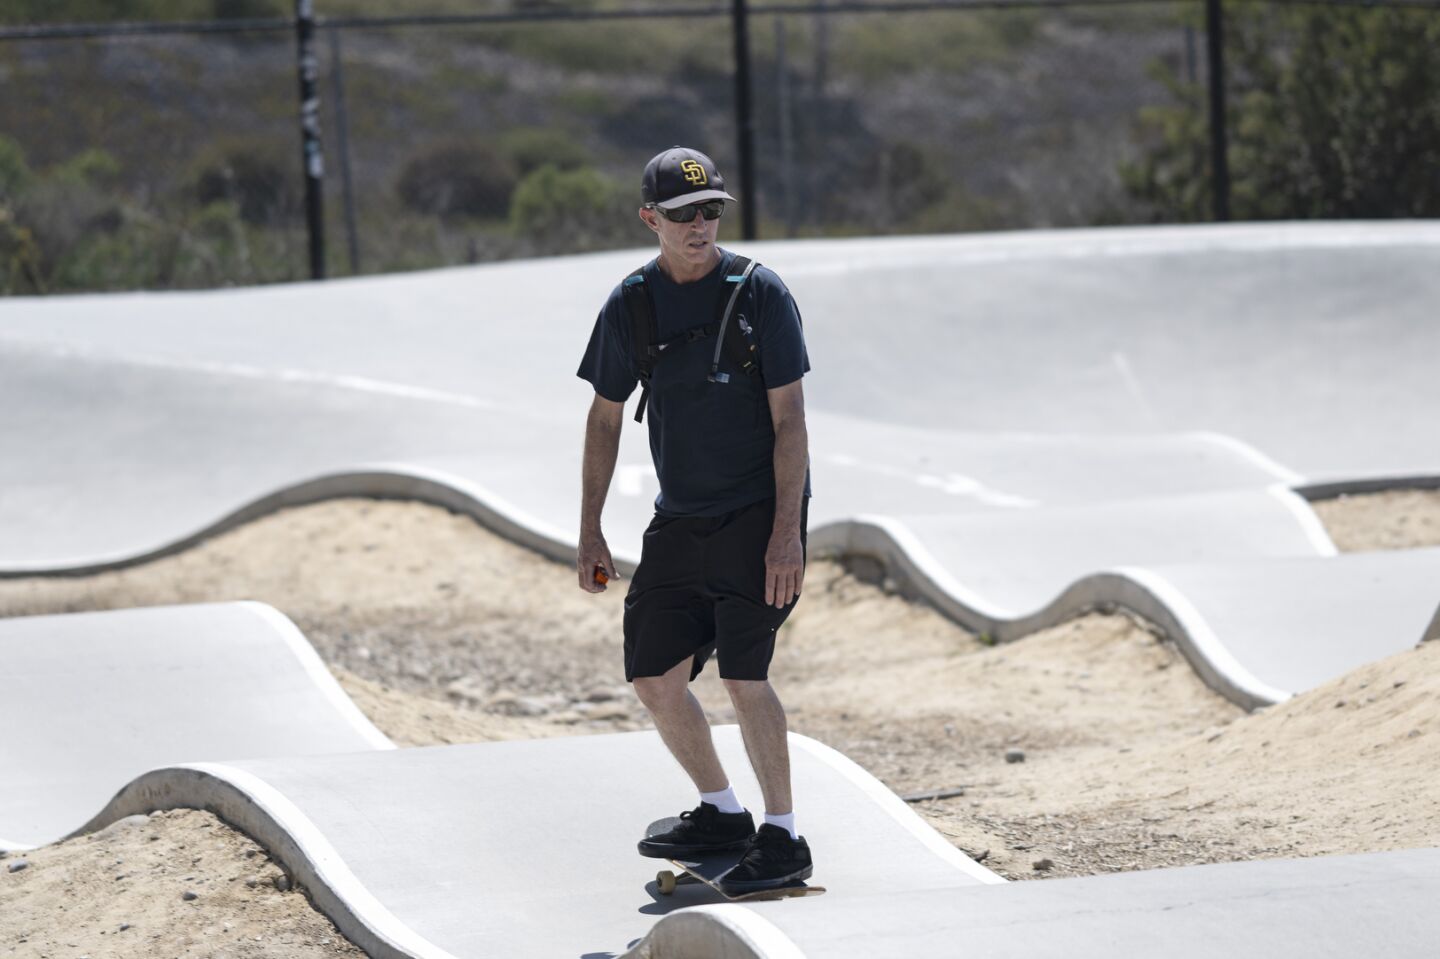 Craig Cliff in the running for the World Record for the Longest Continuous Distance on a Skateboard without a Push or a Stop